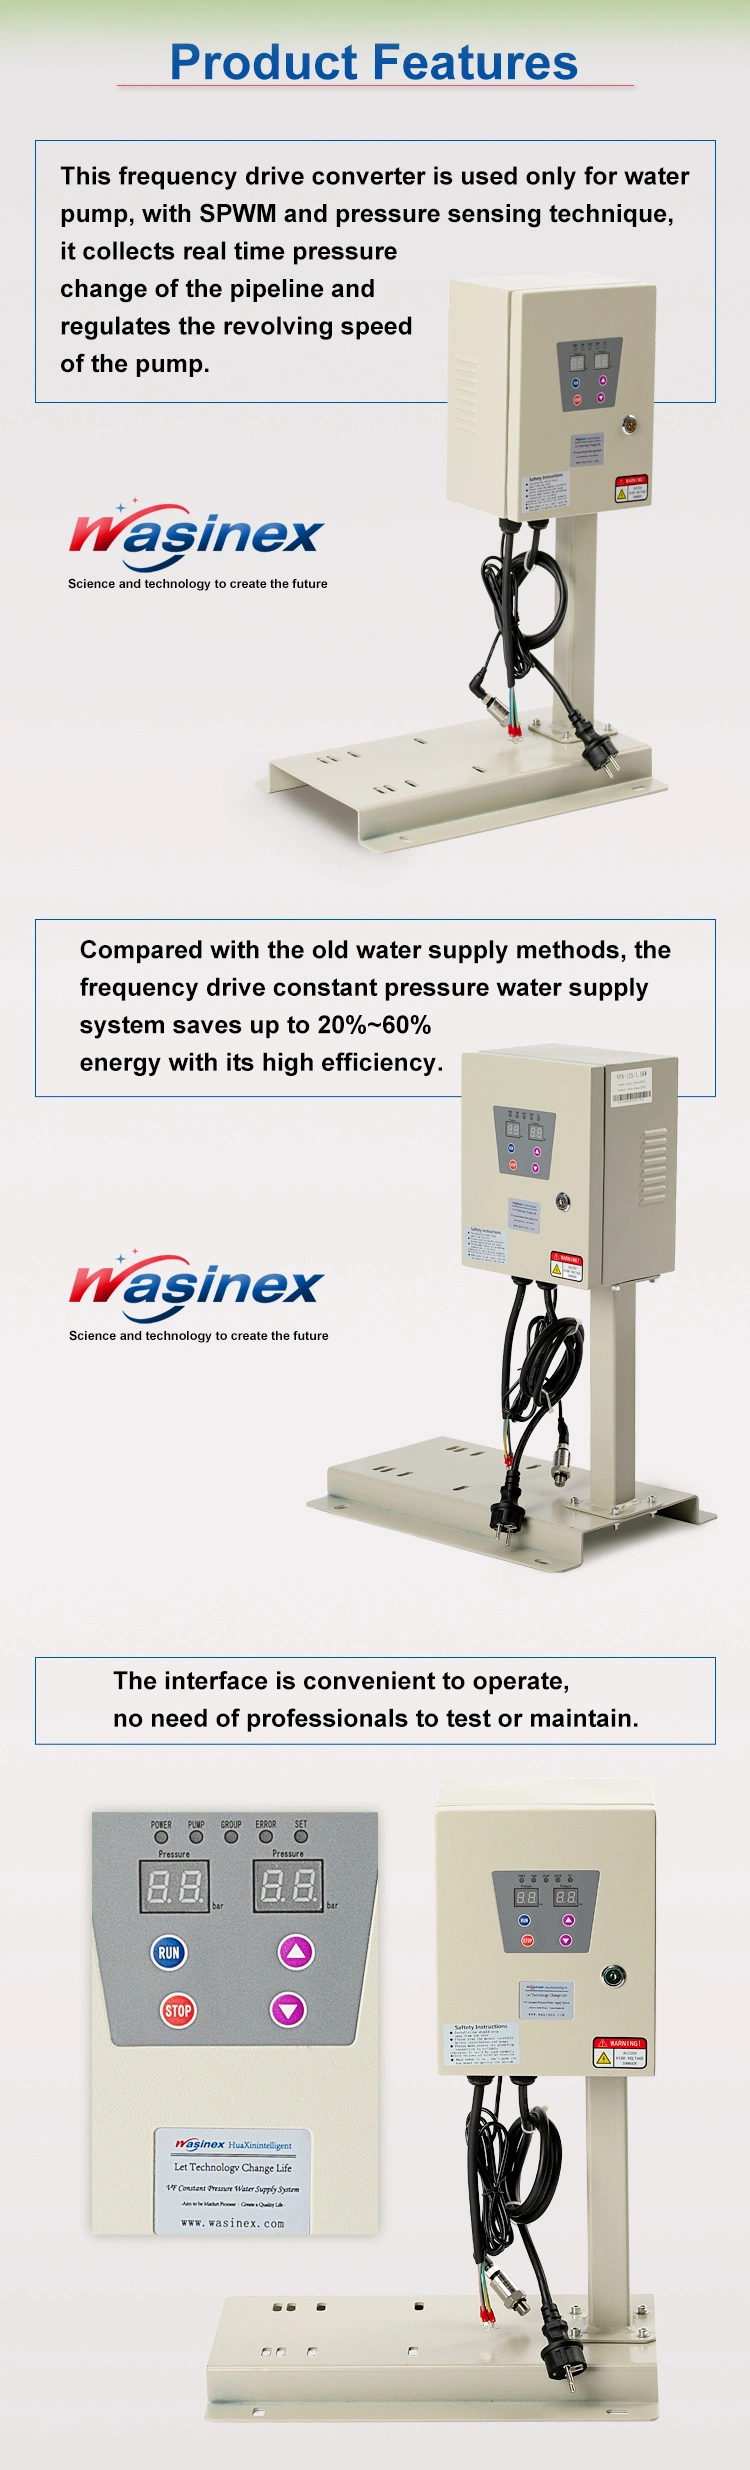 Wasinex 2.2kw Smart Box Type Variable Speed Drive for Water Pump